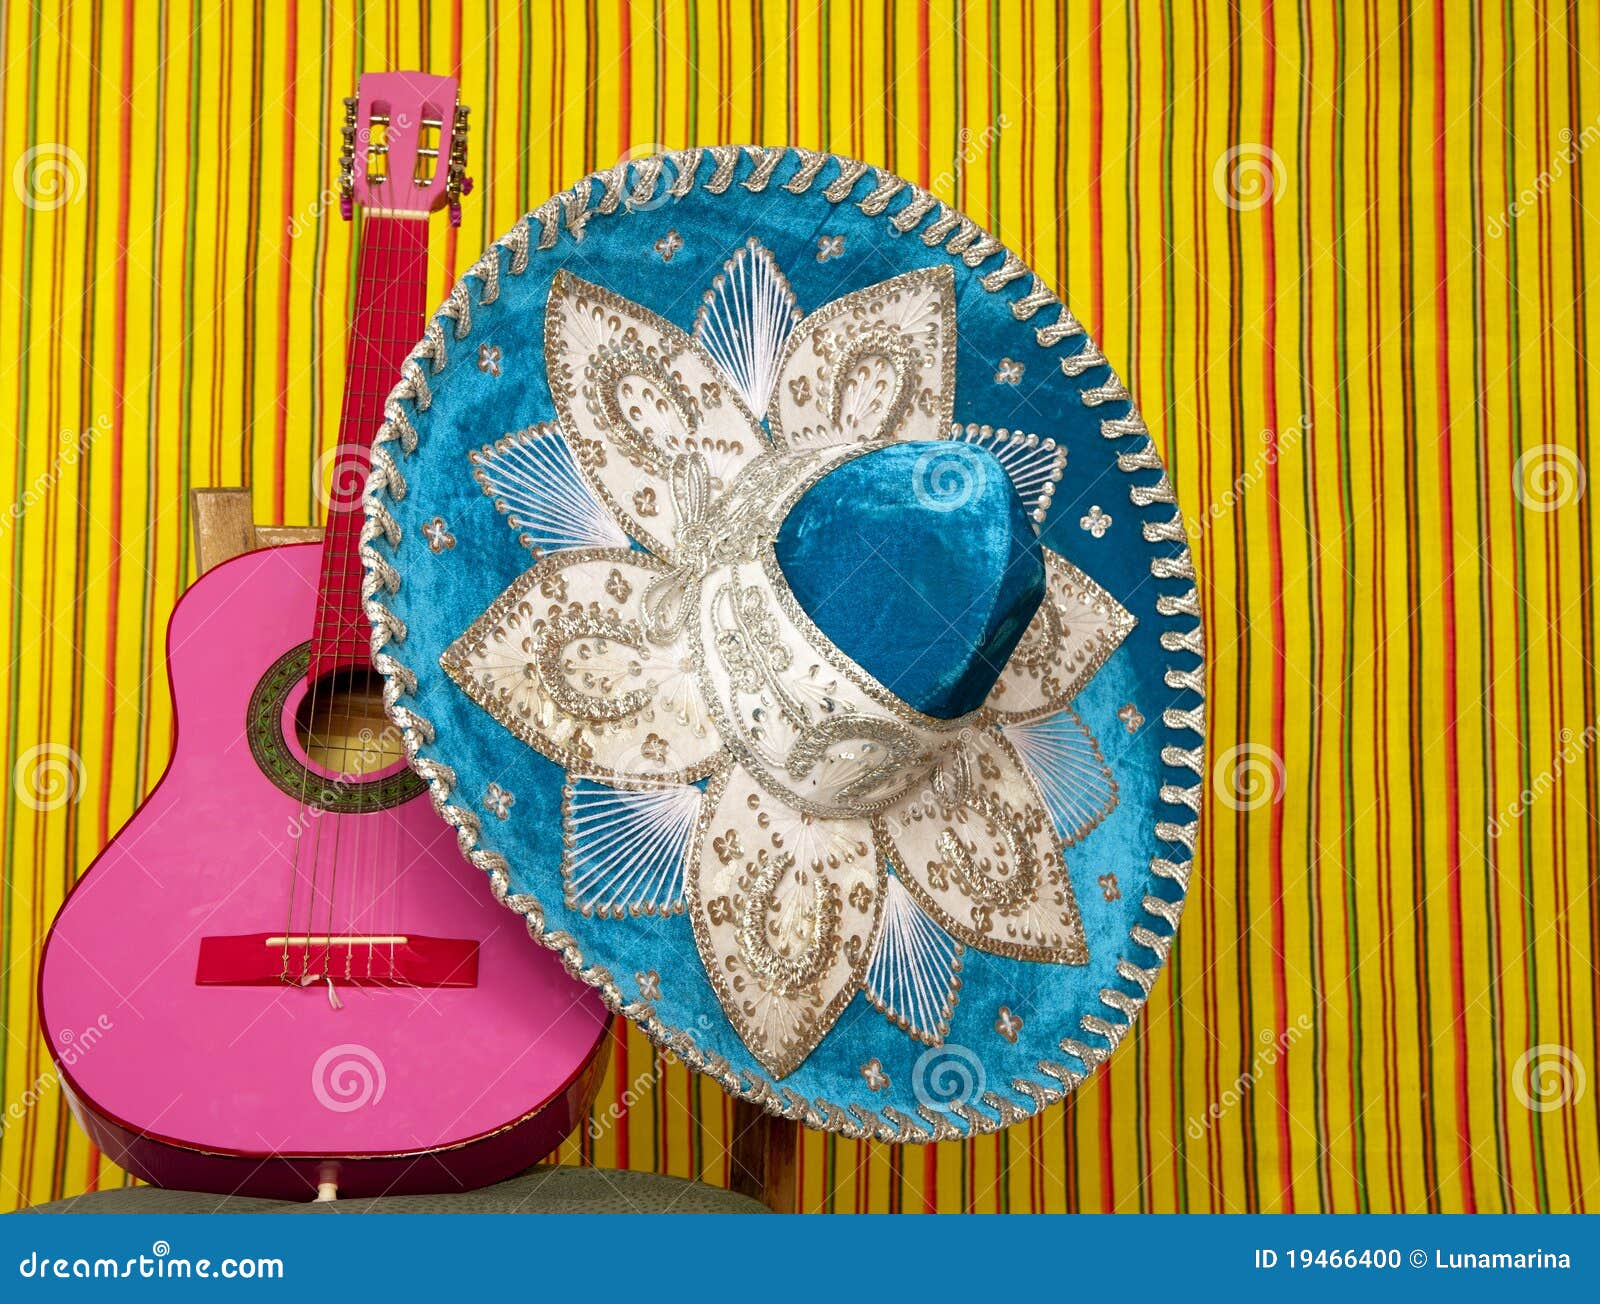 mariachi embroidery mexican hat pink guitar